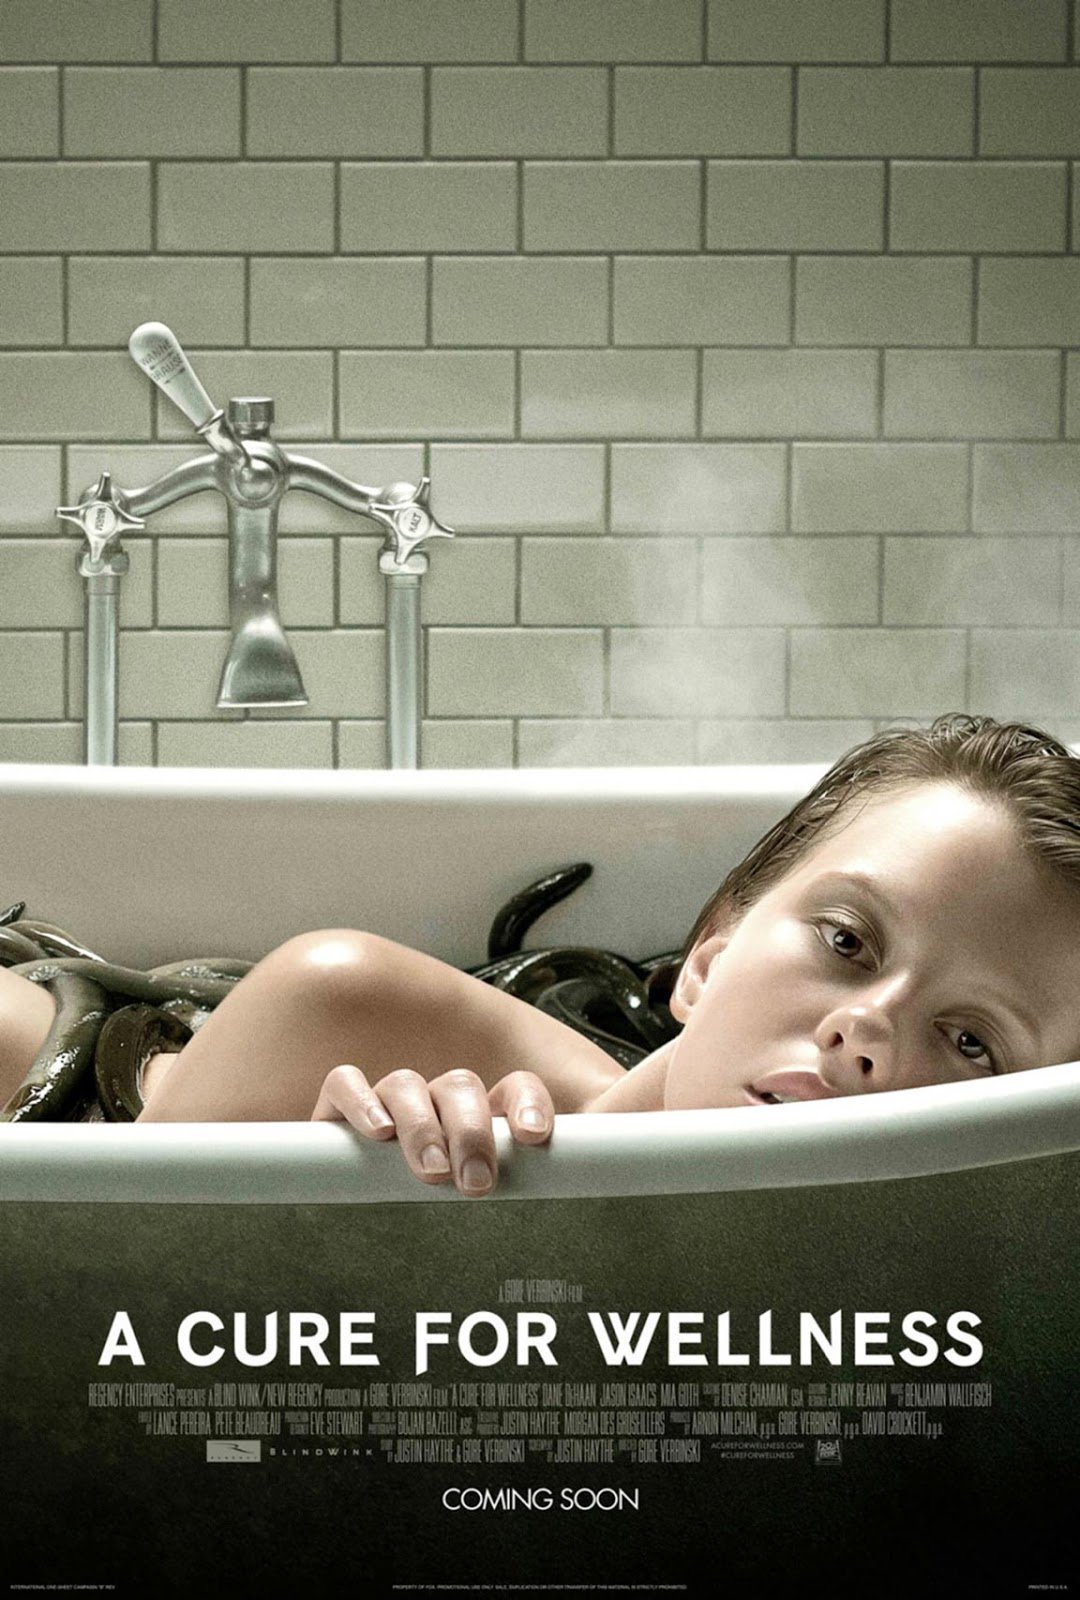 4. 1. "A Cure for Wellness" (2017). 